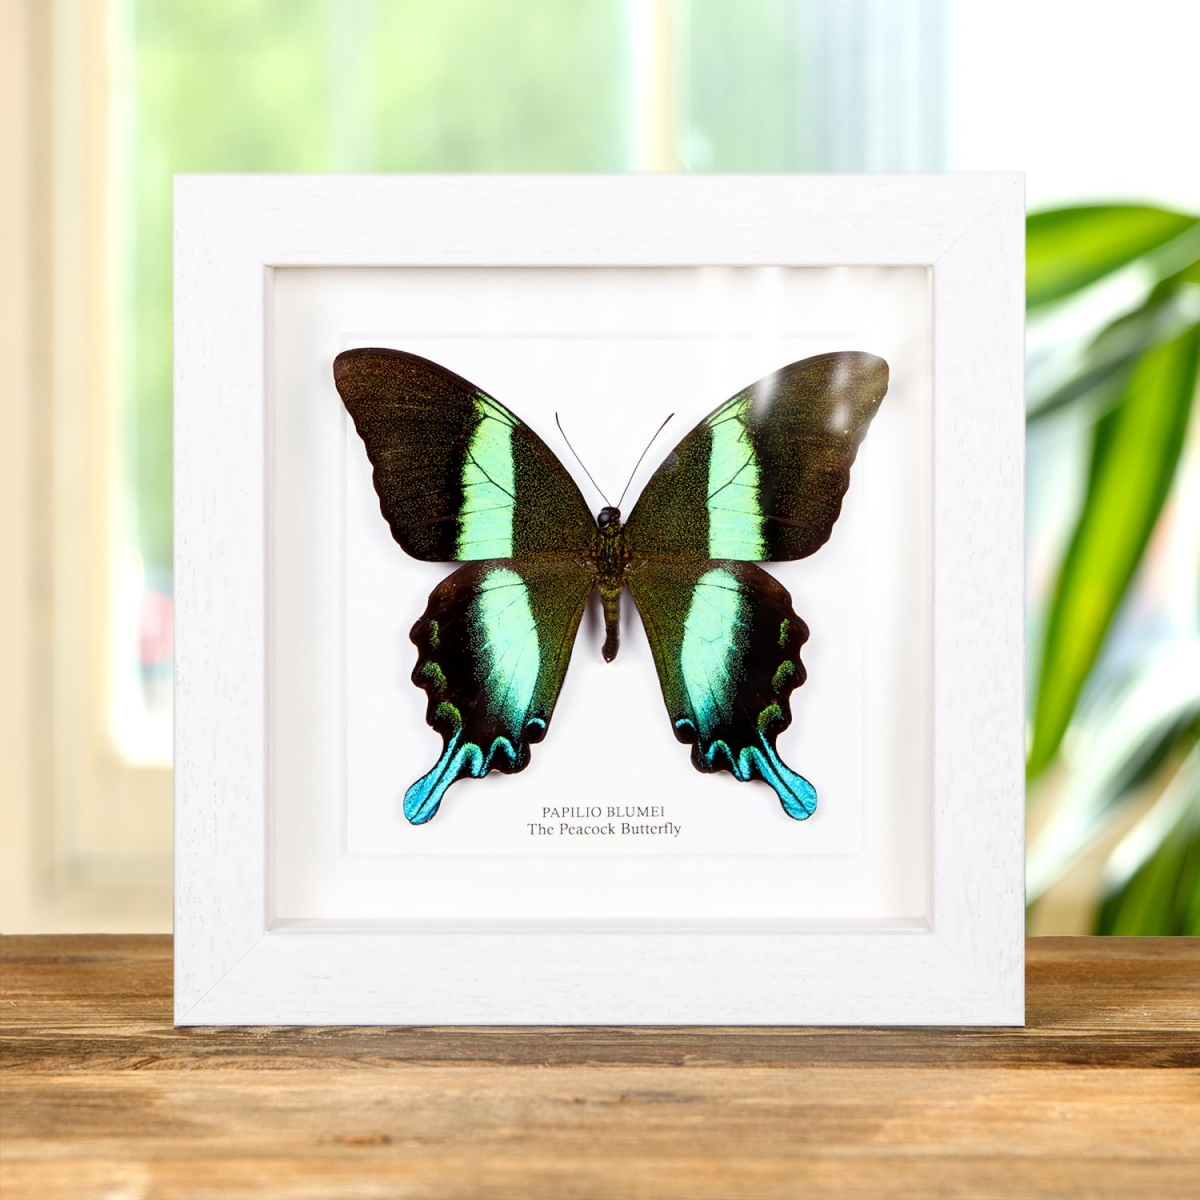 The Peacock Butterfly in Box Frame (Papilio blumei)